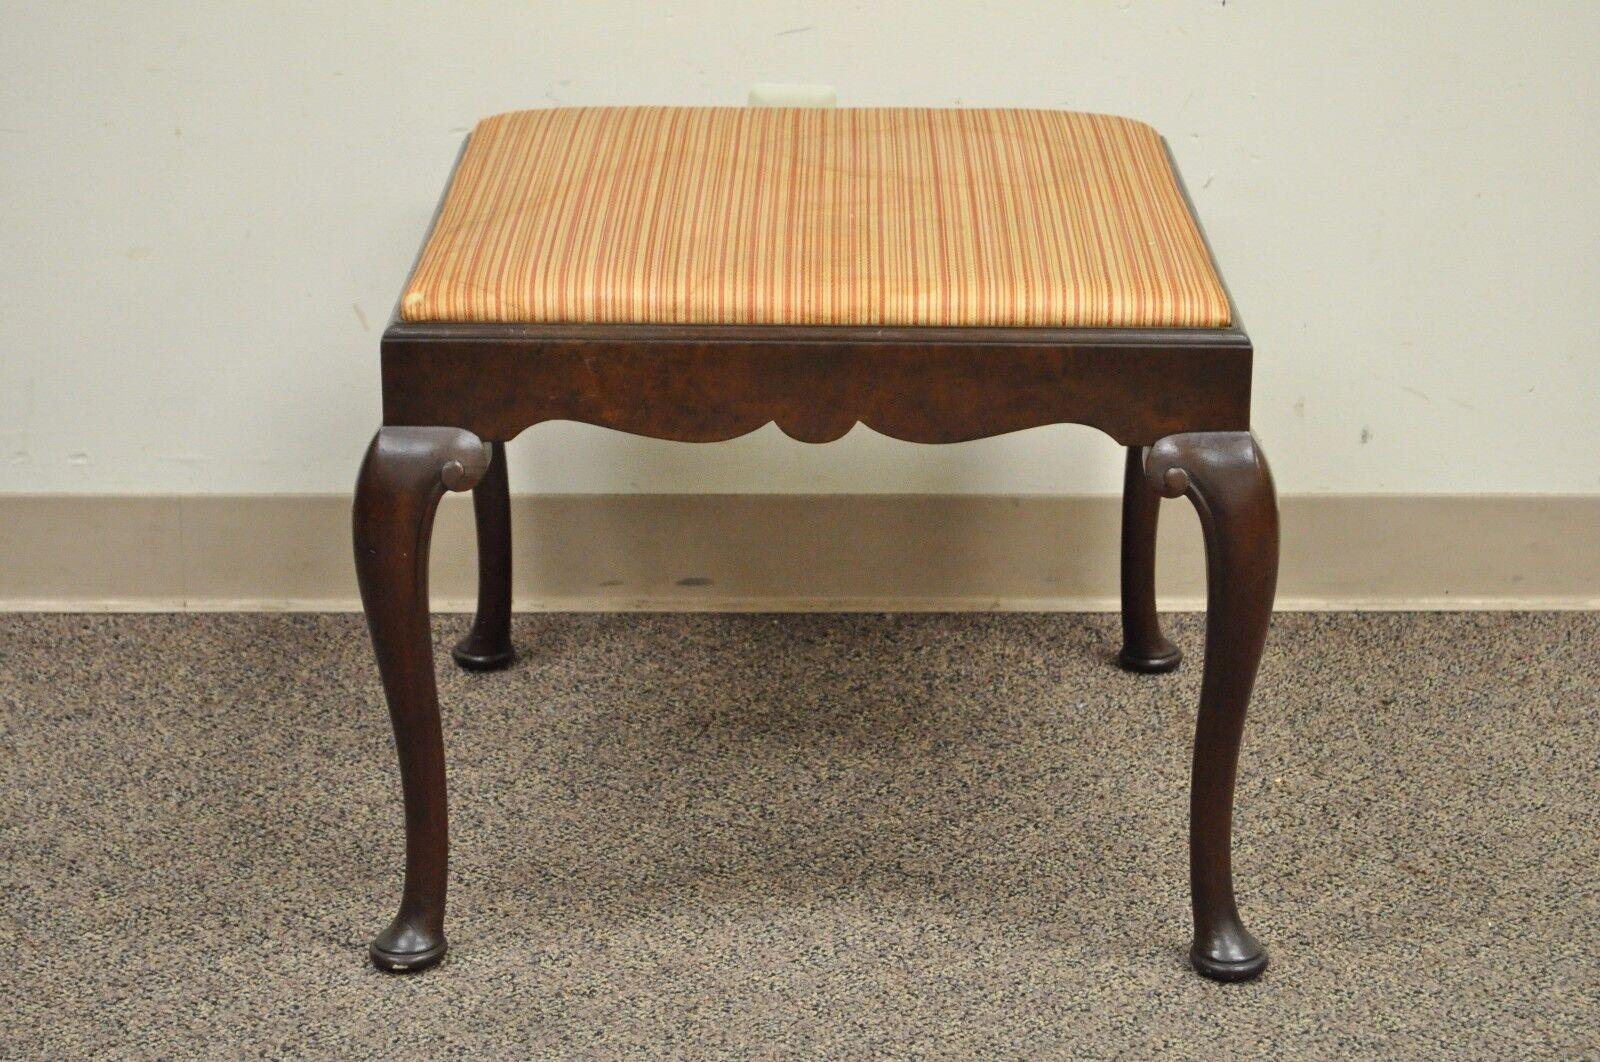 Antique Crotch Mahogany Queen Anne Style Square Stool by Schmieg & Kotzian. Item features solid wood construction, Queen Anne Legs, Pad Feet, Shaped Skirt, Classic Traditional Form, Great Quality and Construction, Marked 